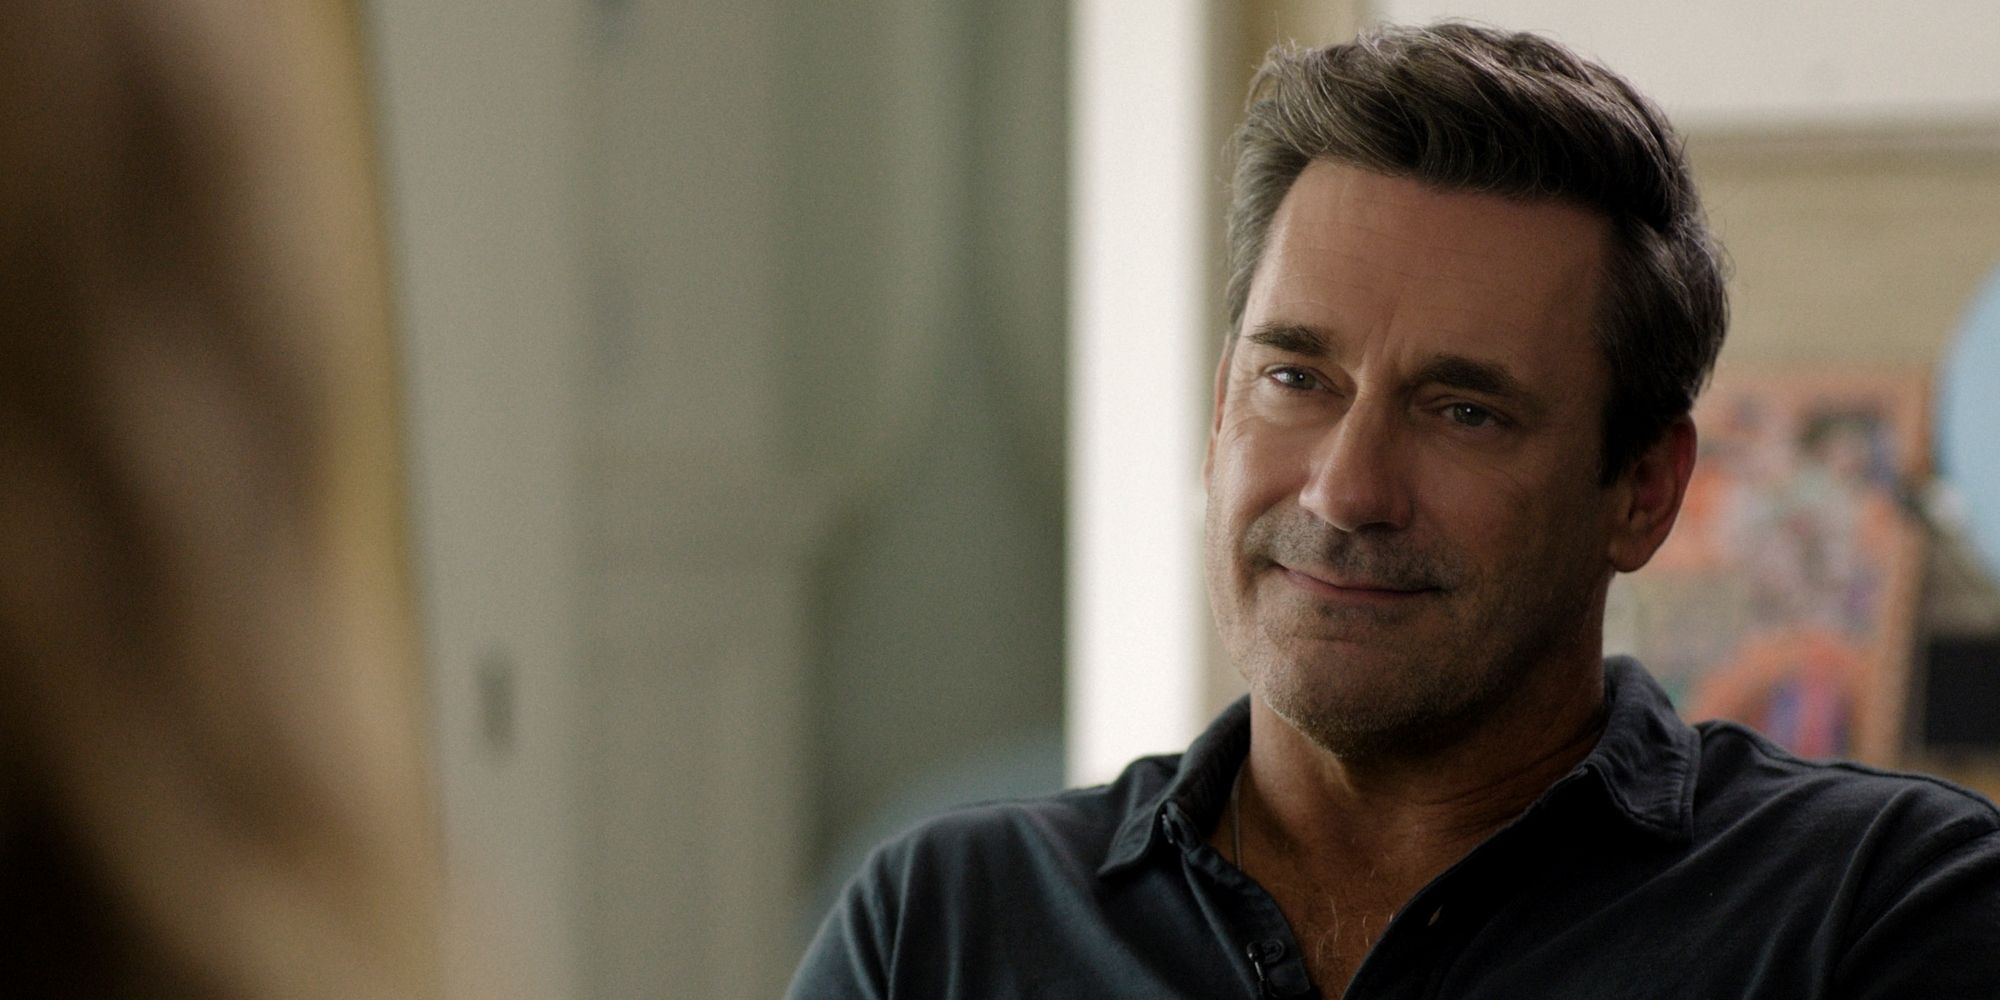 Returning Apple TV Show Confirms Jon Hamm’s New Villain Role Will Be His Best After 8 Years